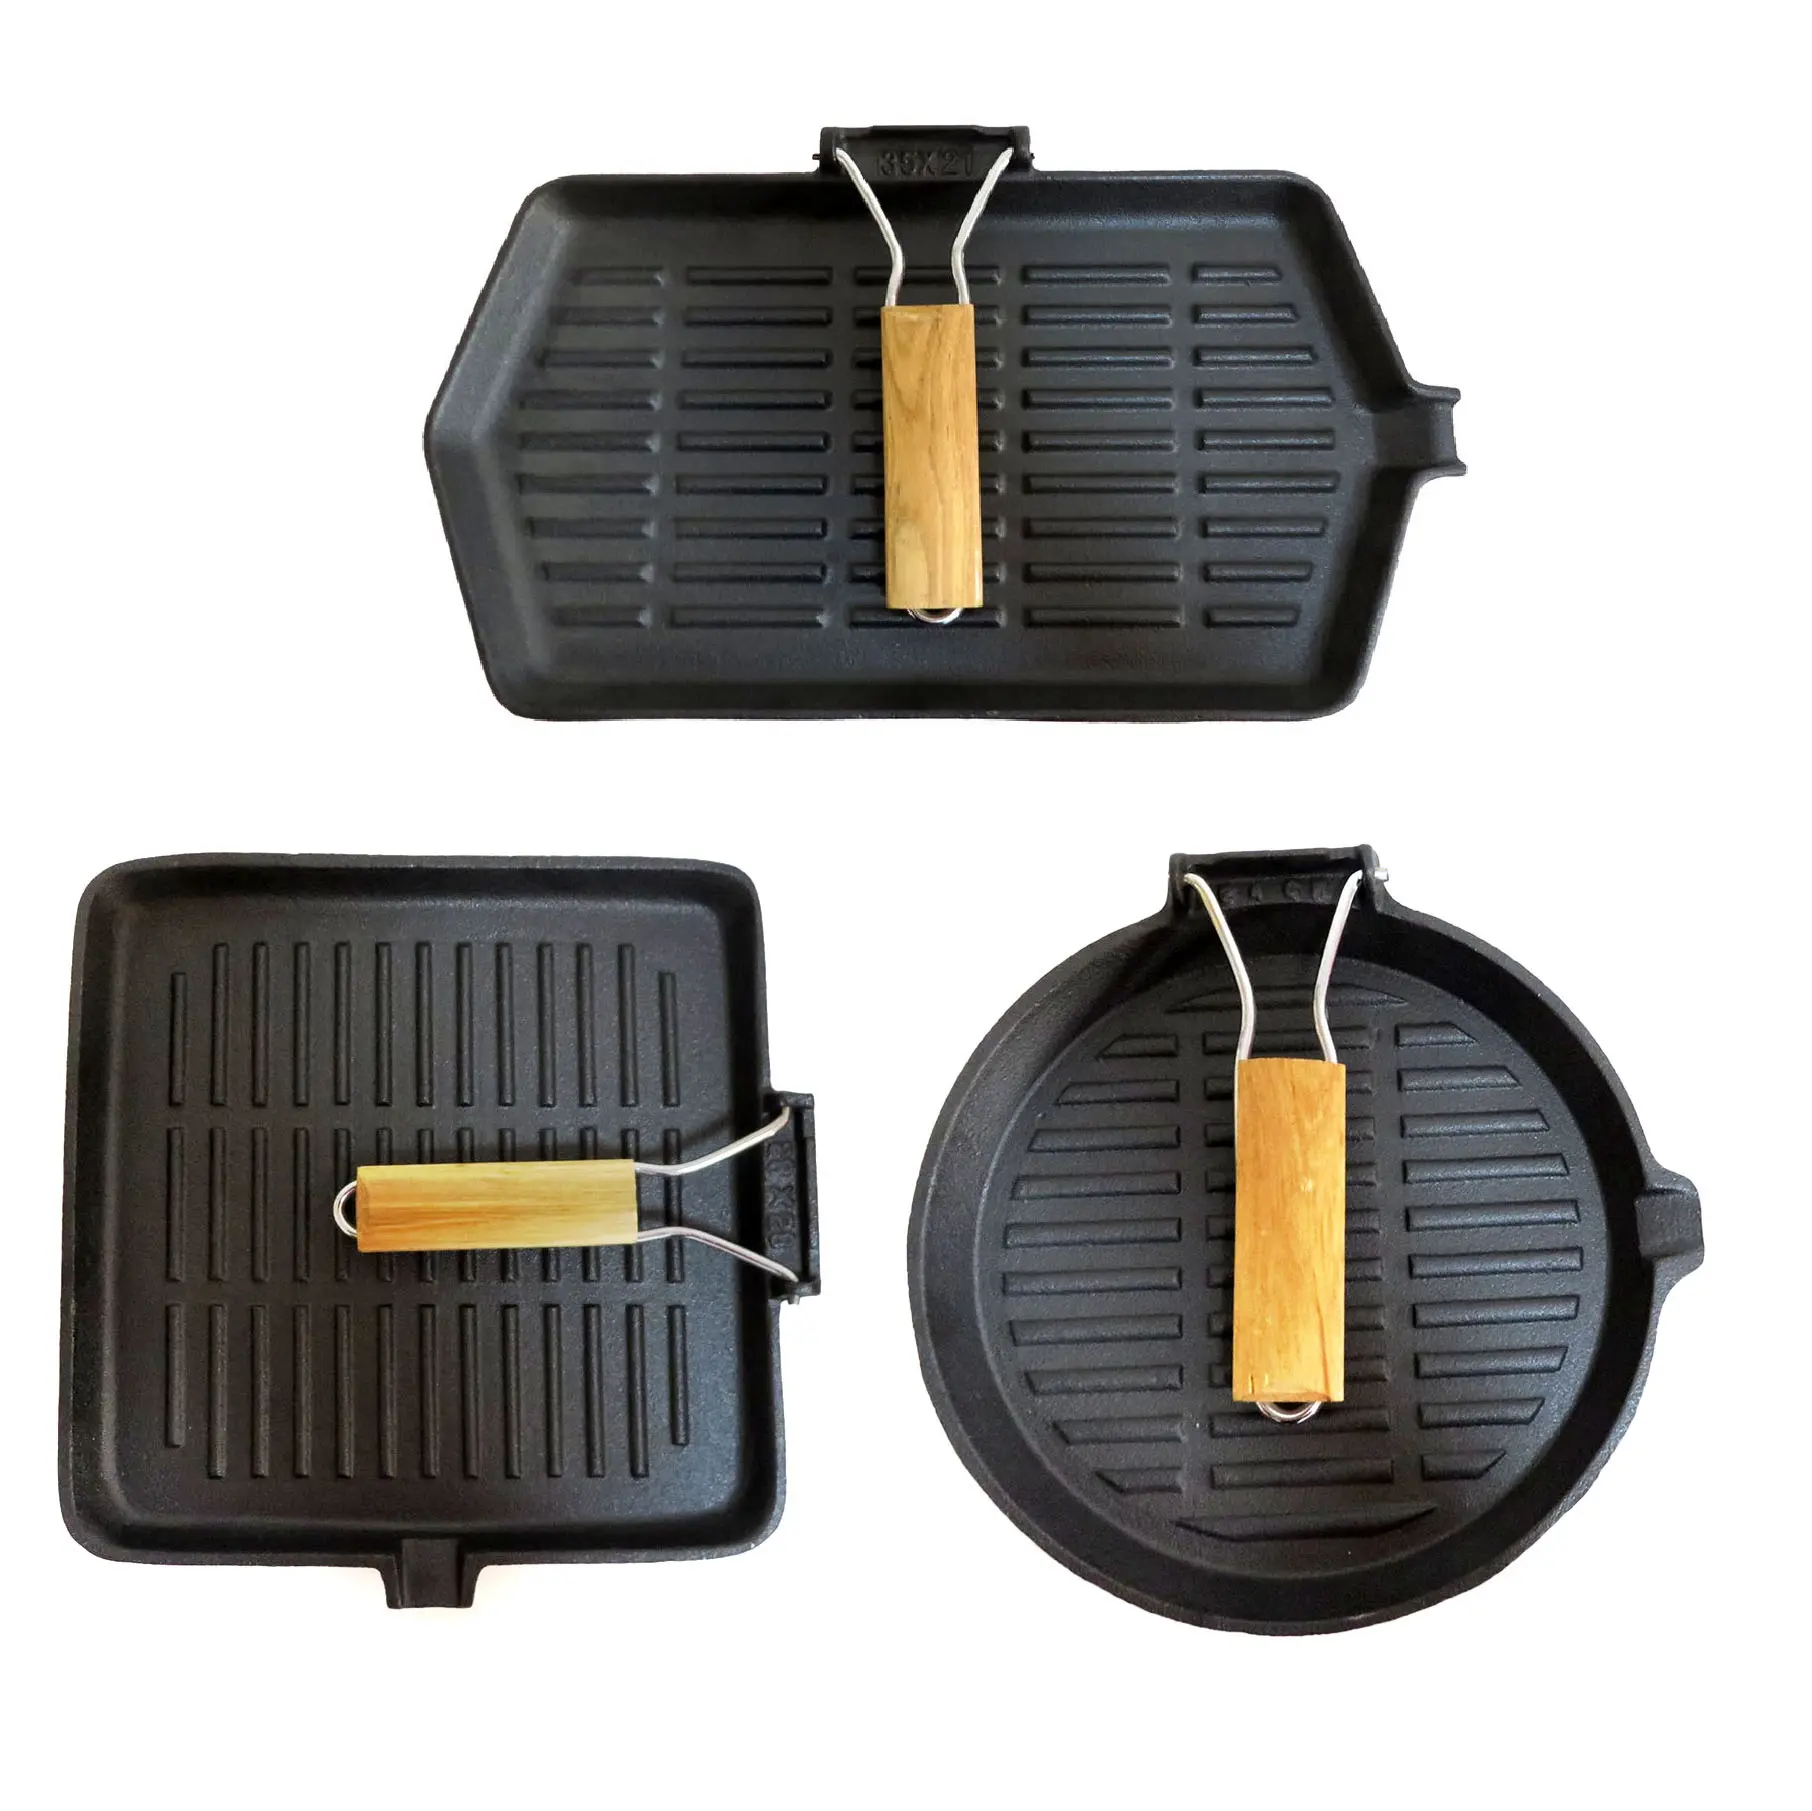 Non-stick Enameled Pre seasoned Cast Iron Grill Pan with Foldable Wooden Handle BBQ Frying Pan Cast Iron Skillet Outdoor Camping